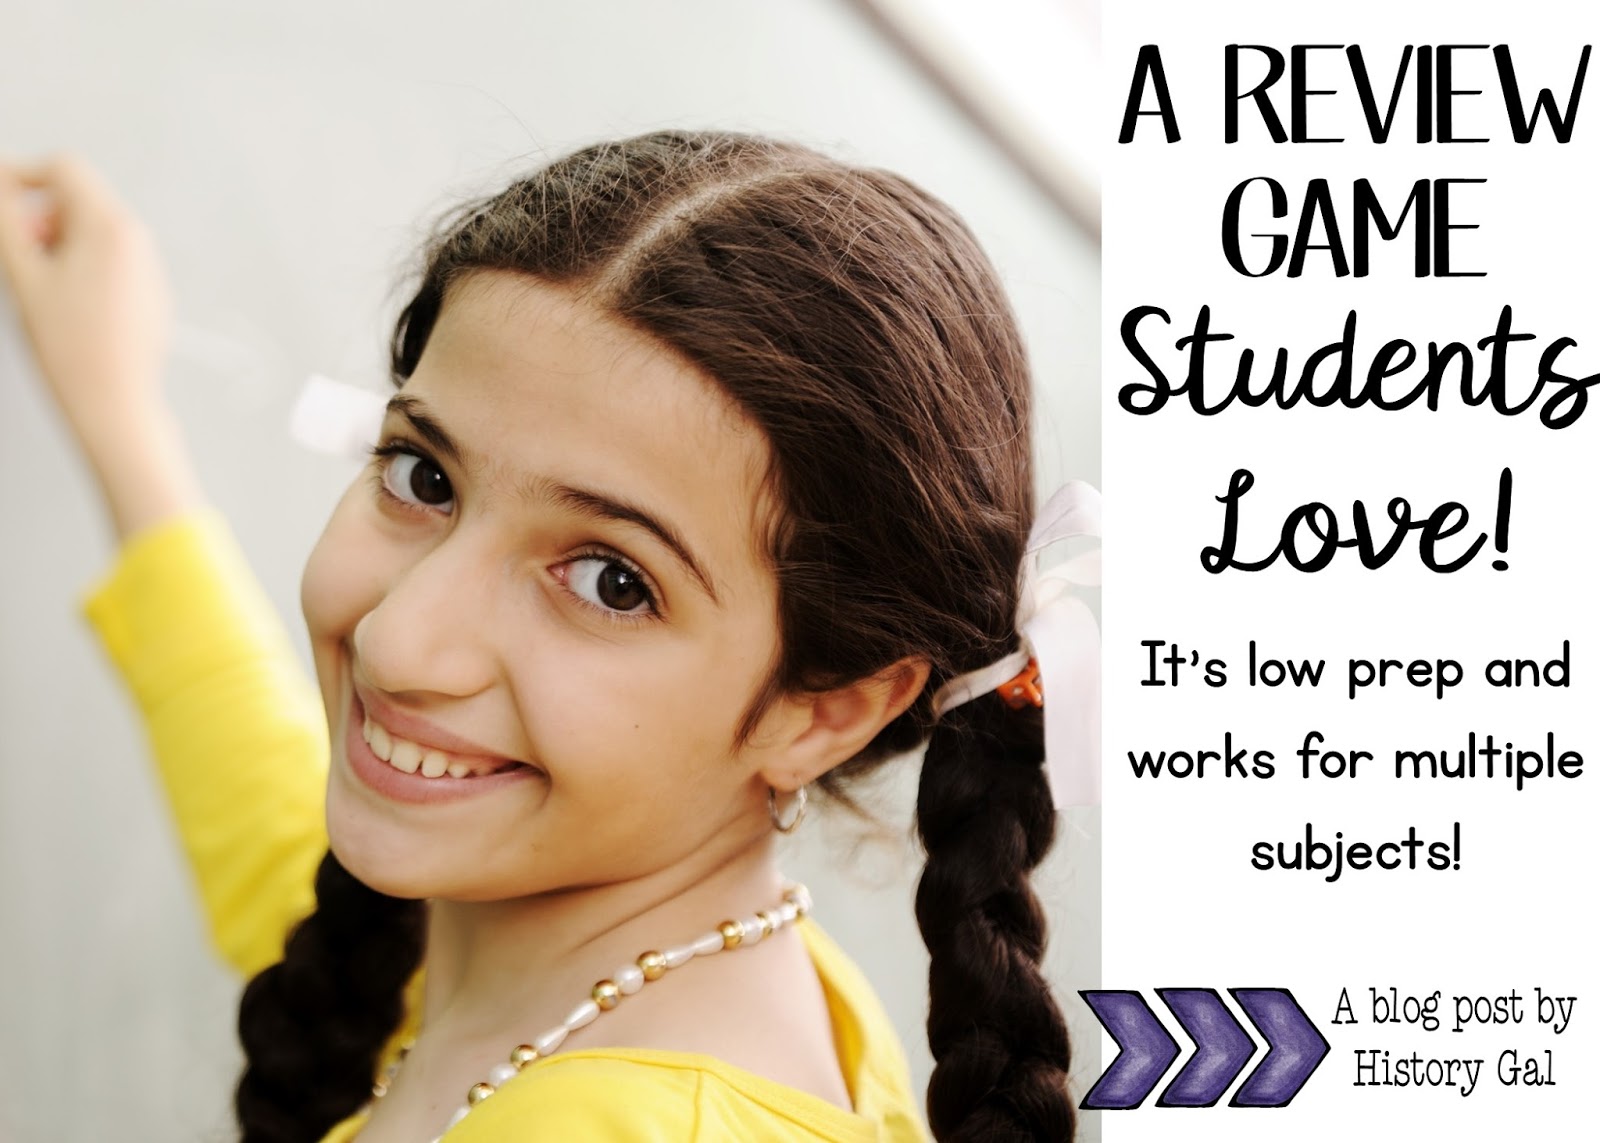 An easy, low prep review game students love by History Gal